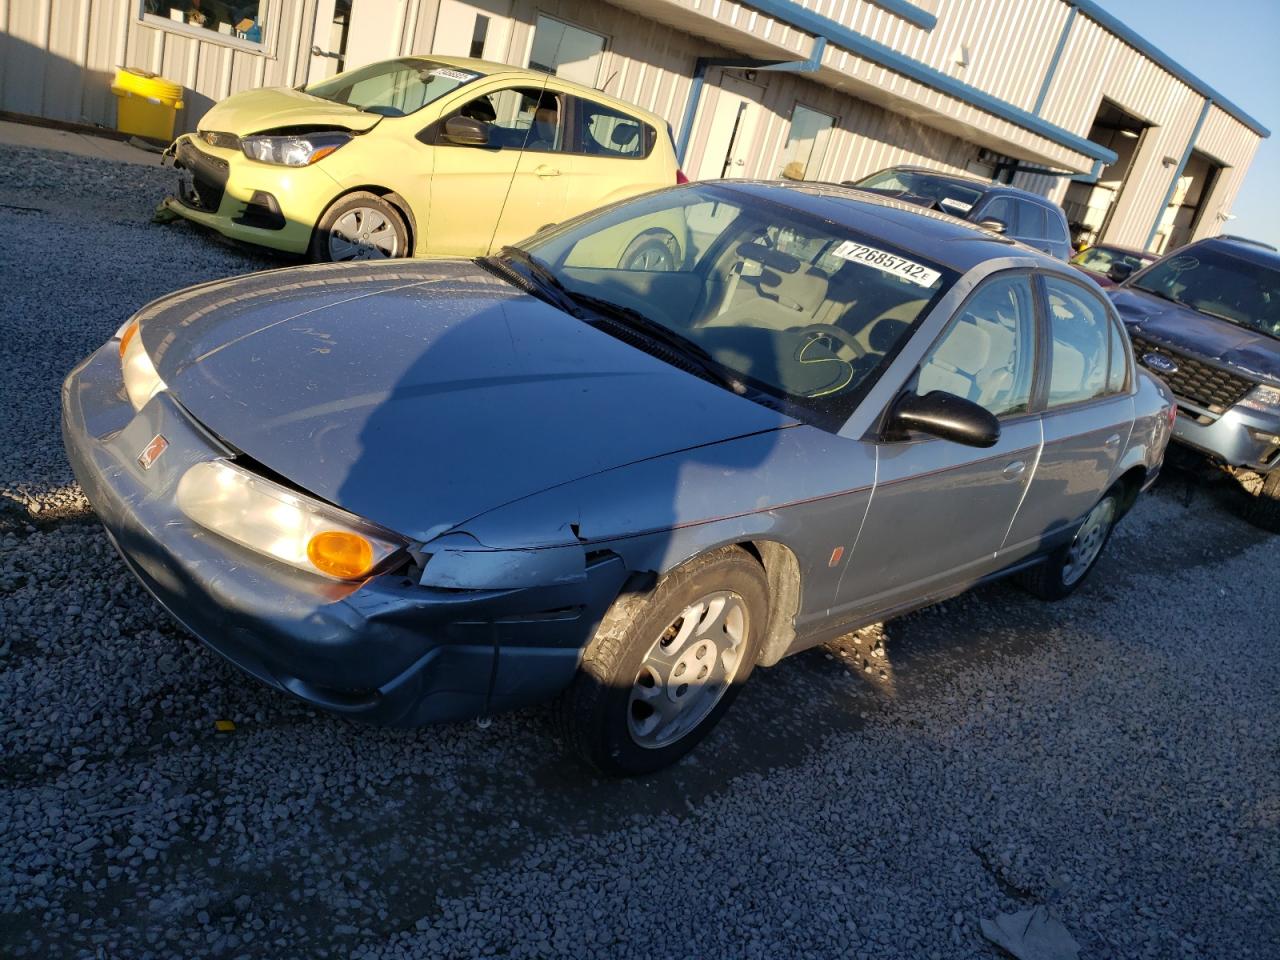 2001 Saturn SL2 for sale at Copart Earlington, KY Lot #72685*** |  SalvageReseller.com